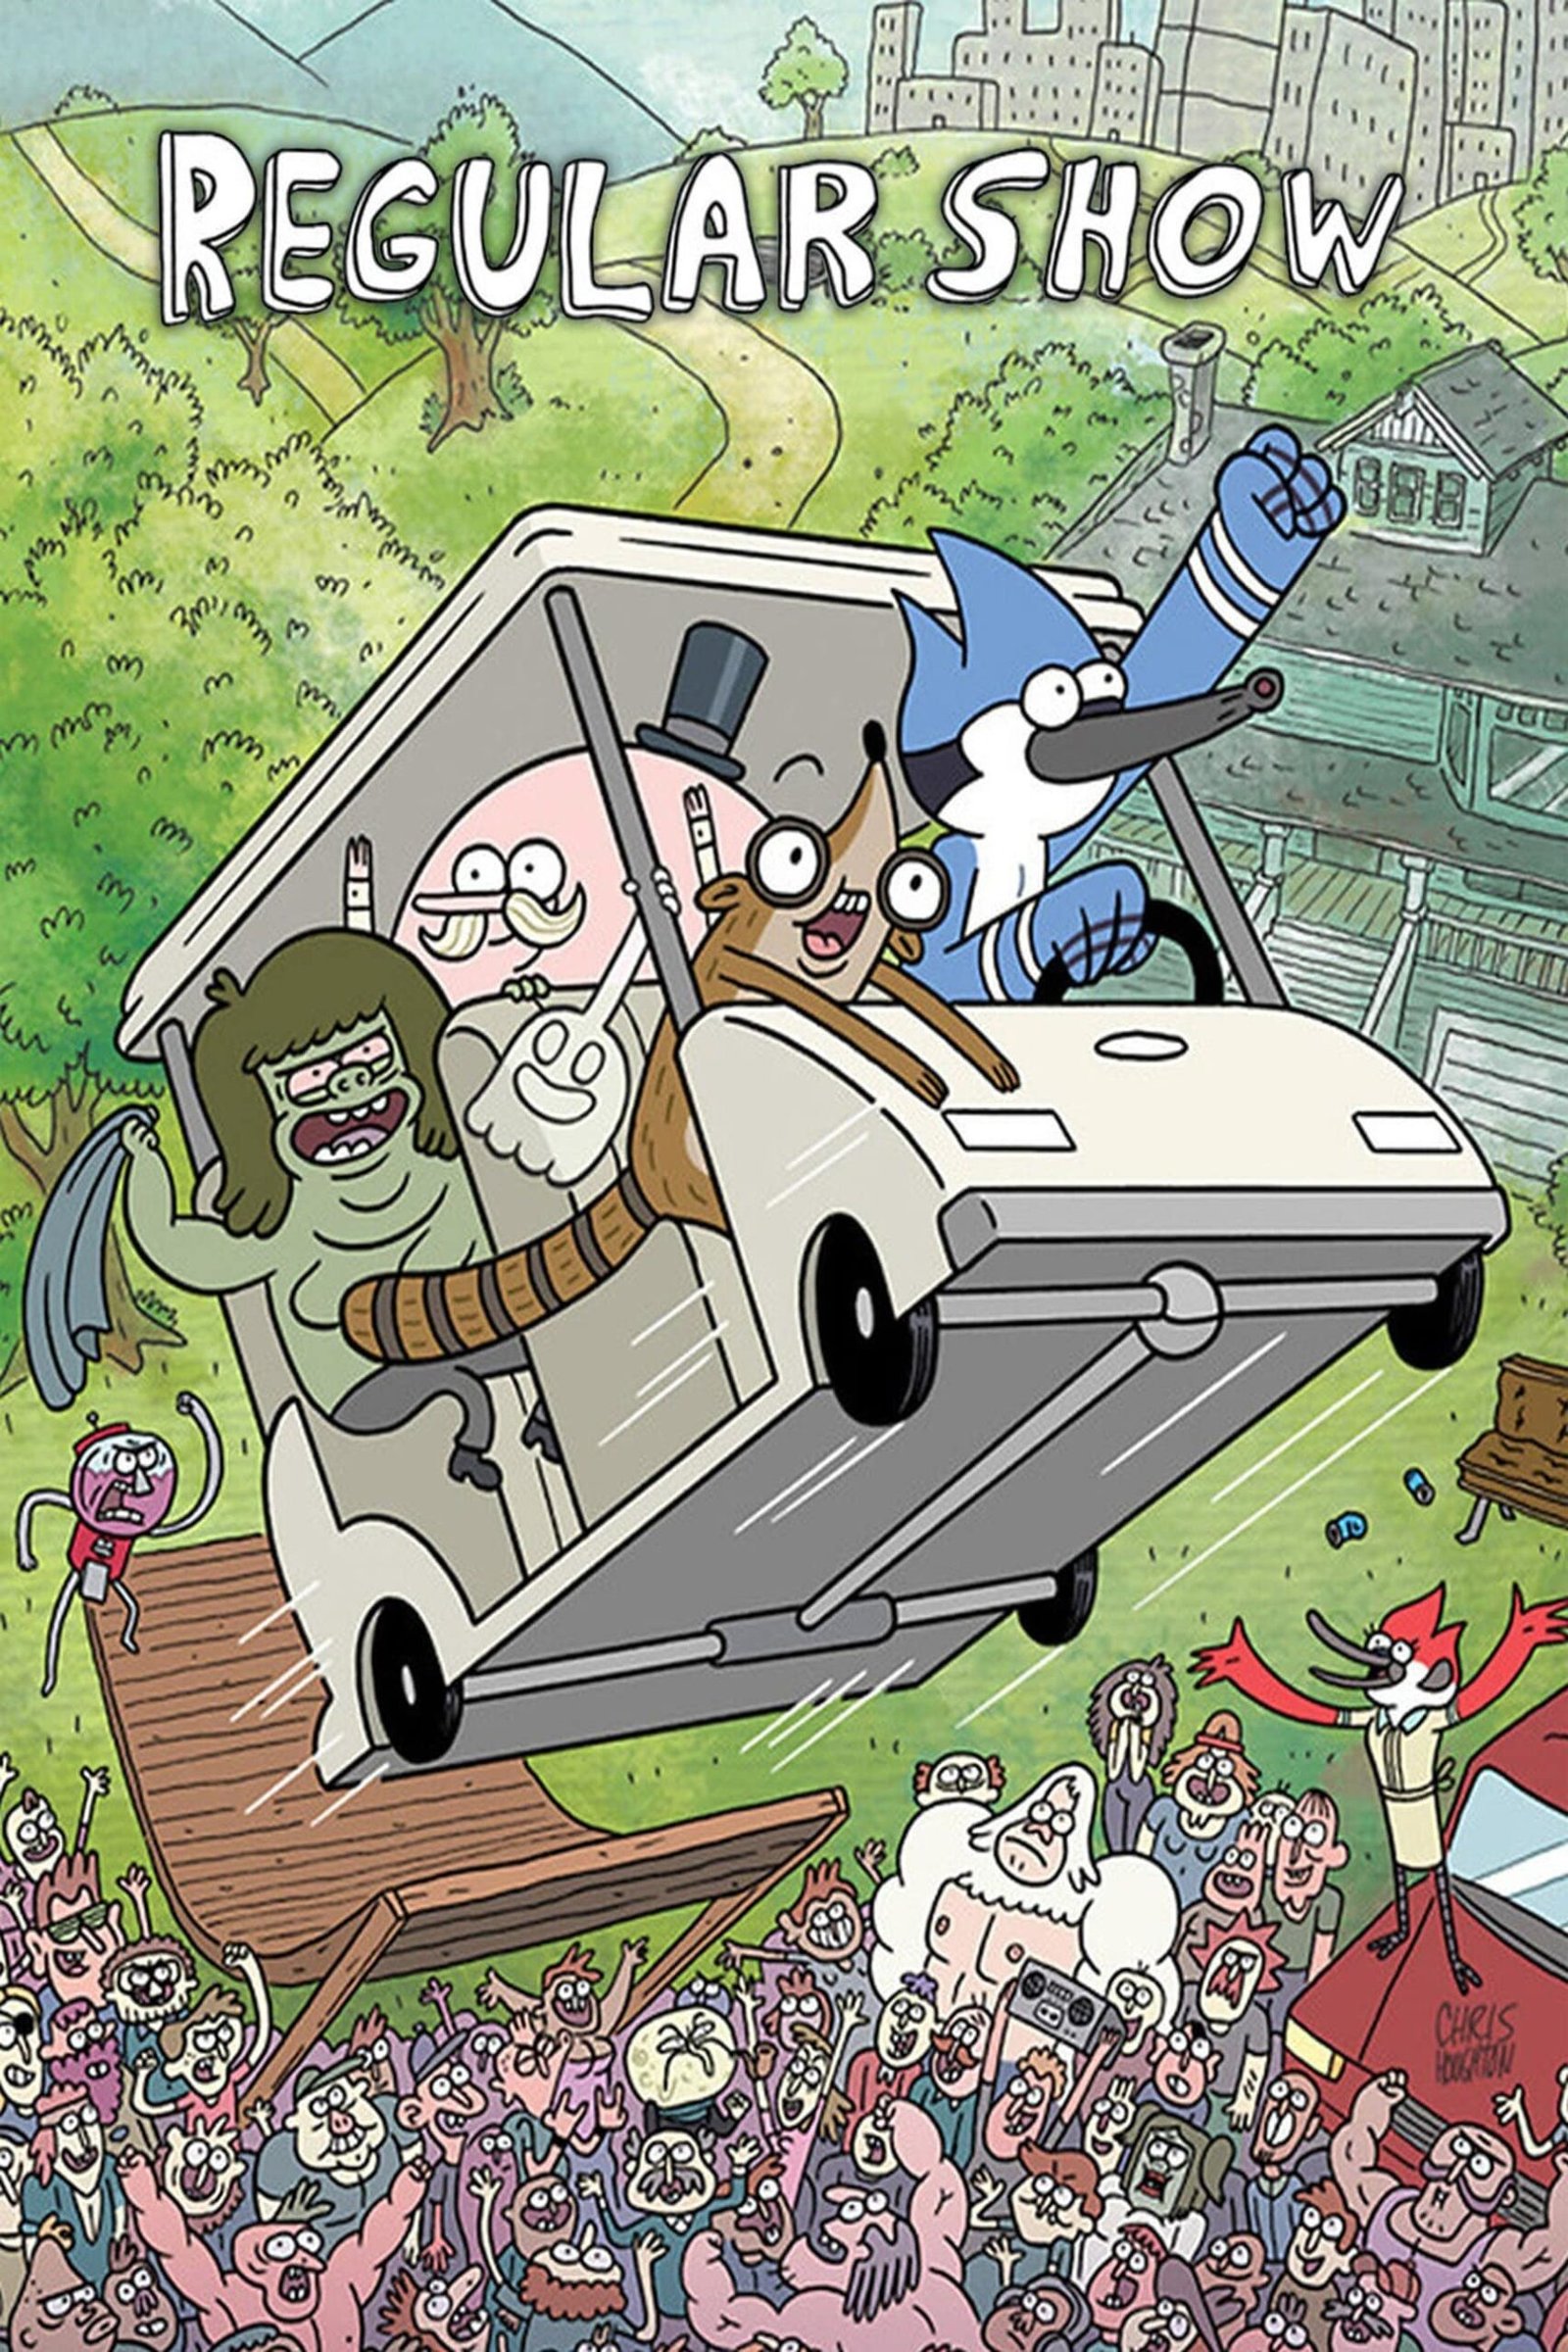 Characters in a golf cart